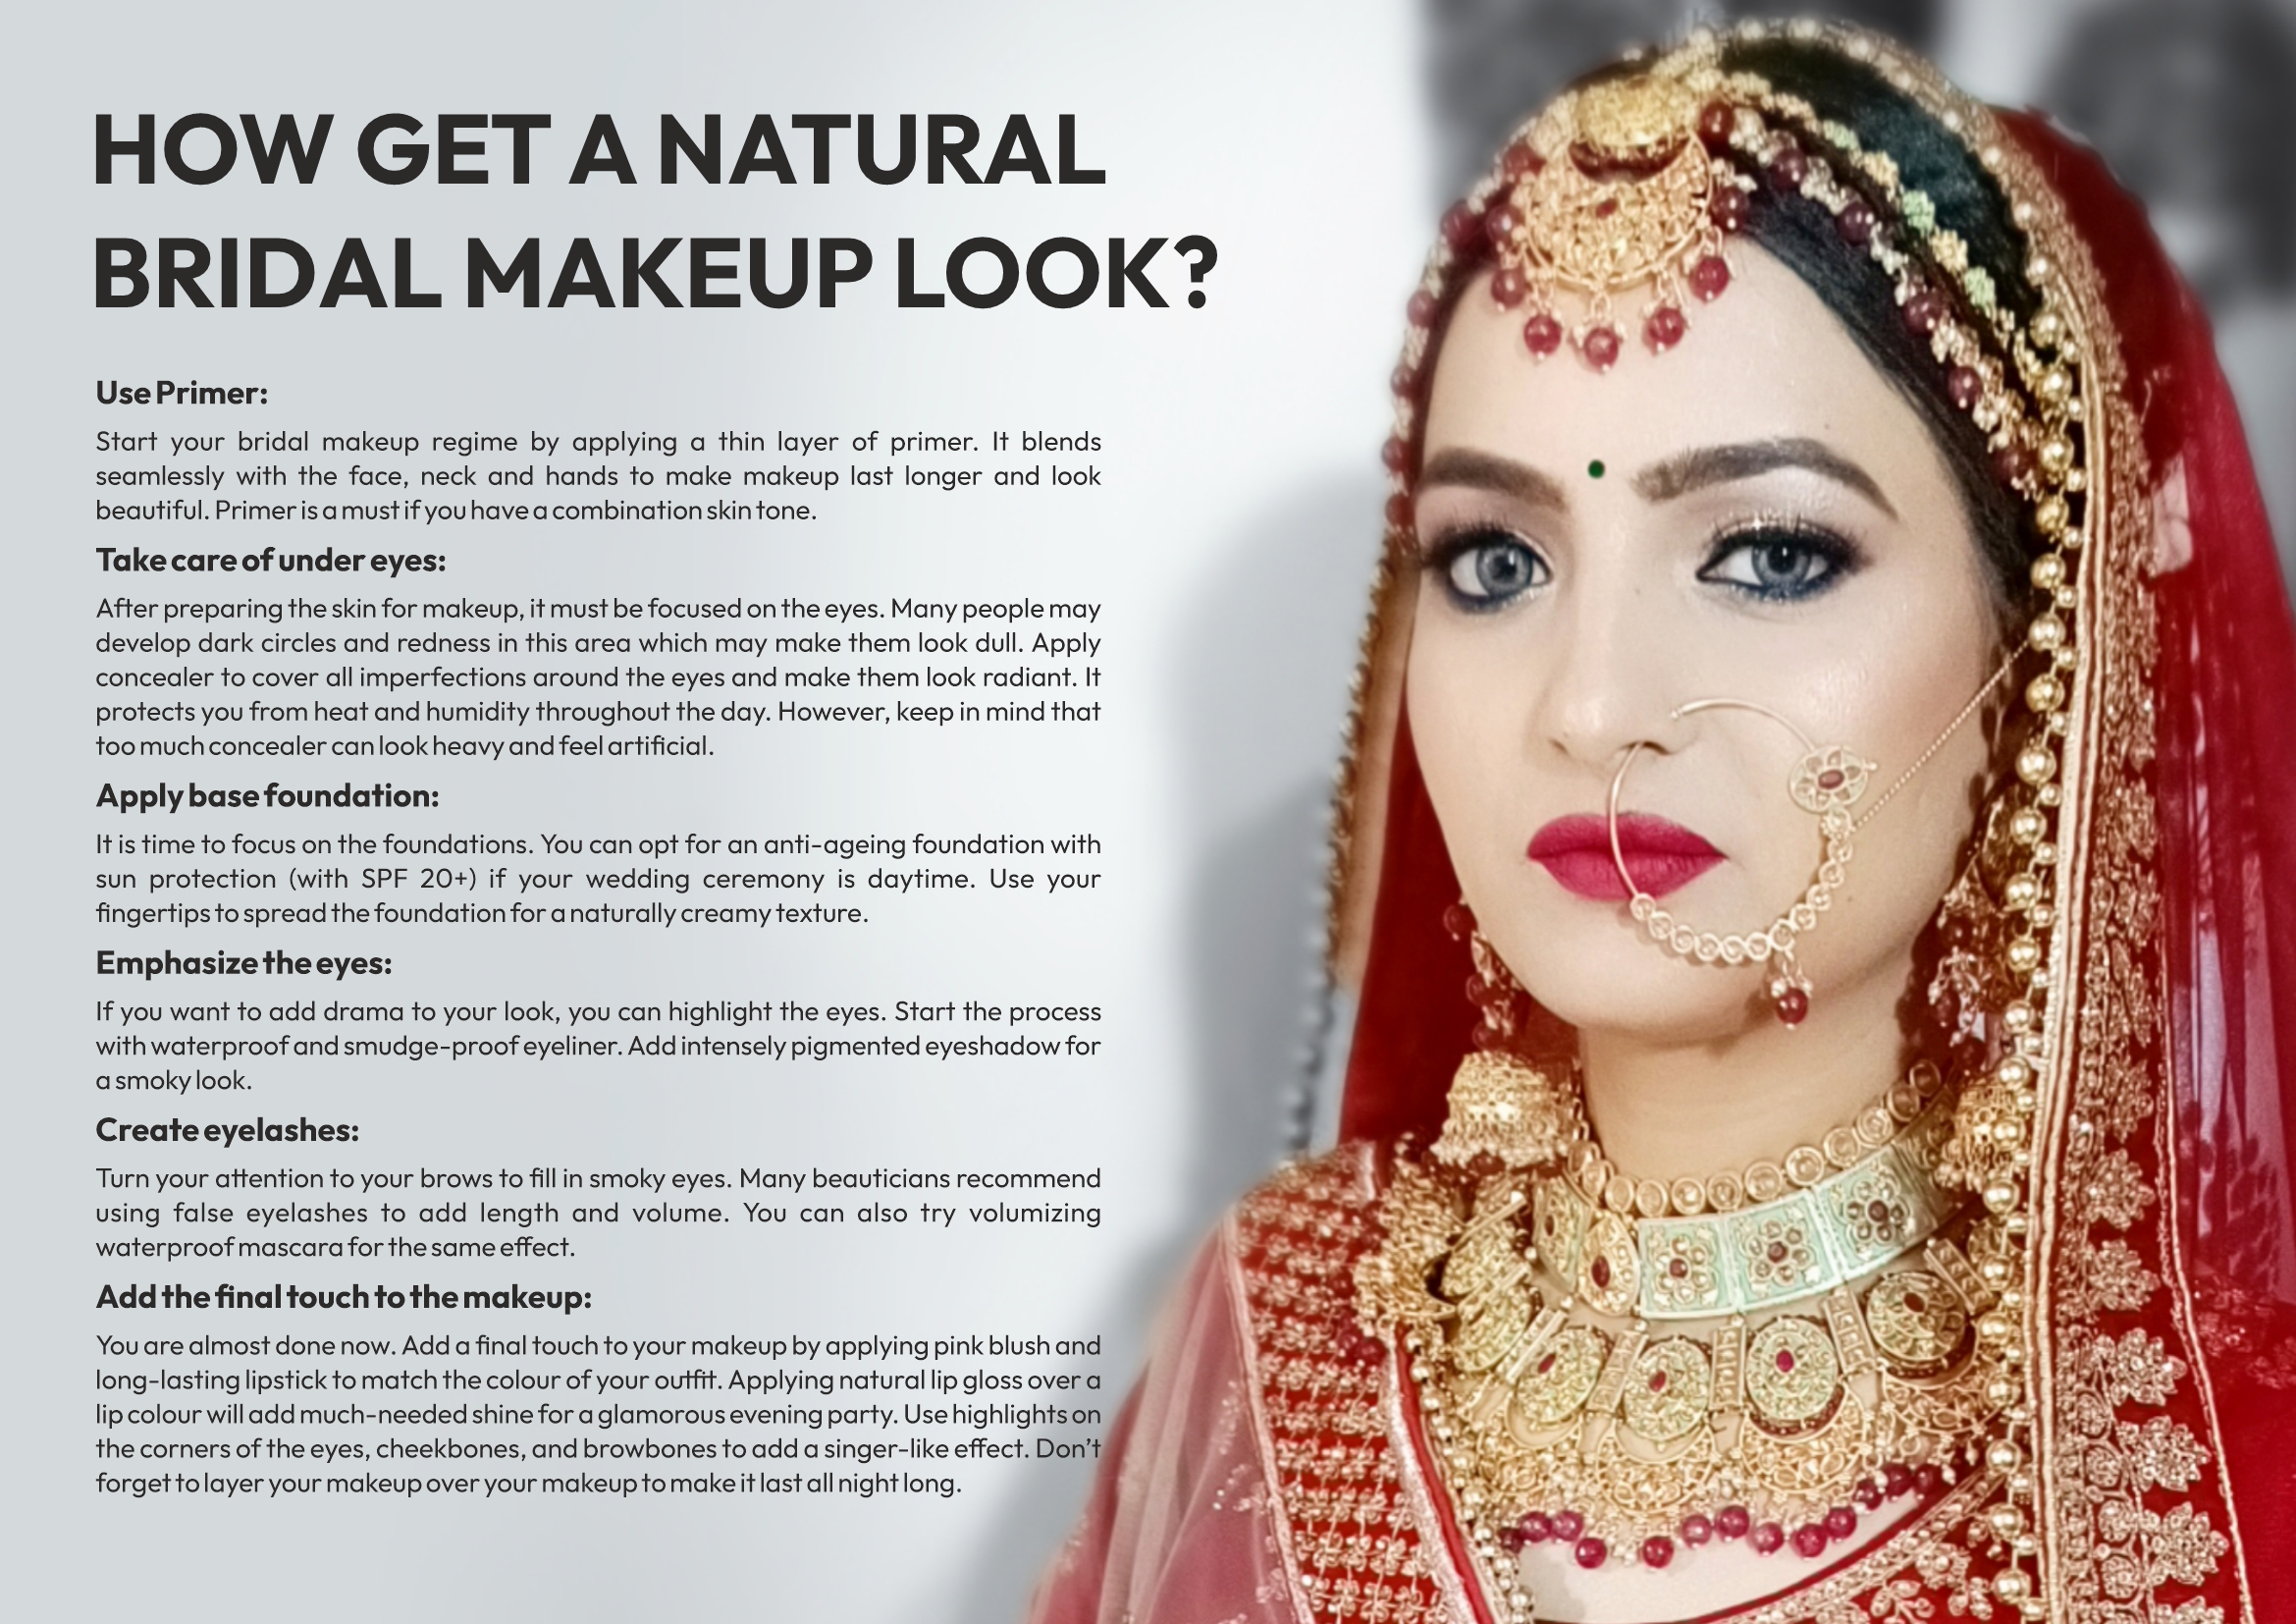 Why you should go for a Natural Look at Your Wedding